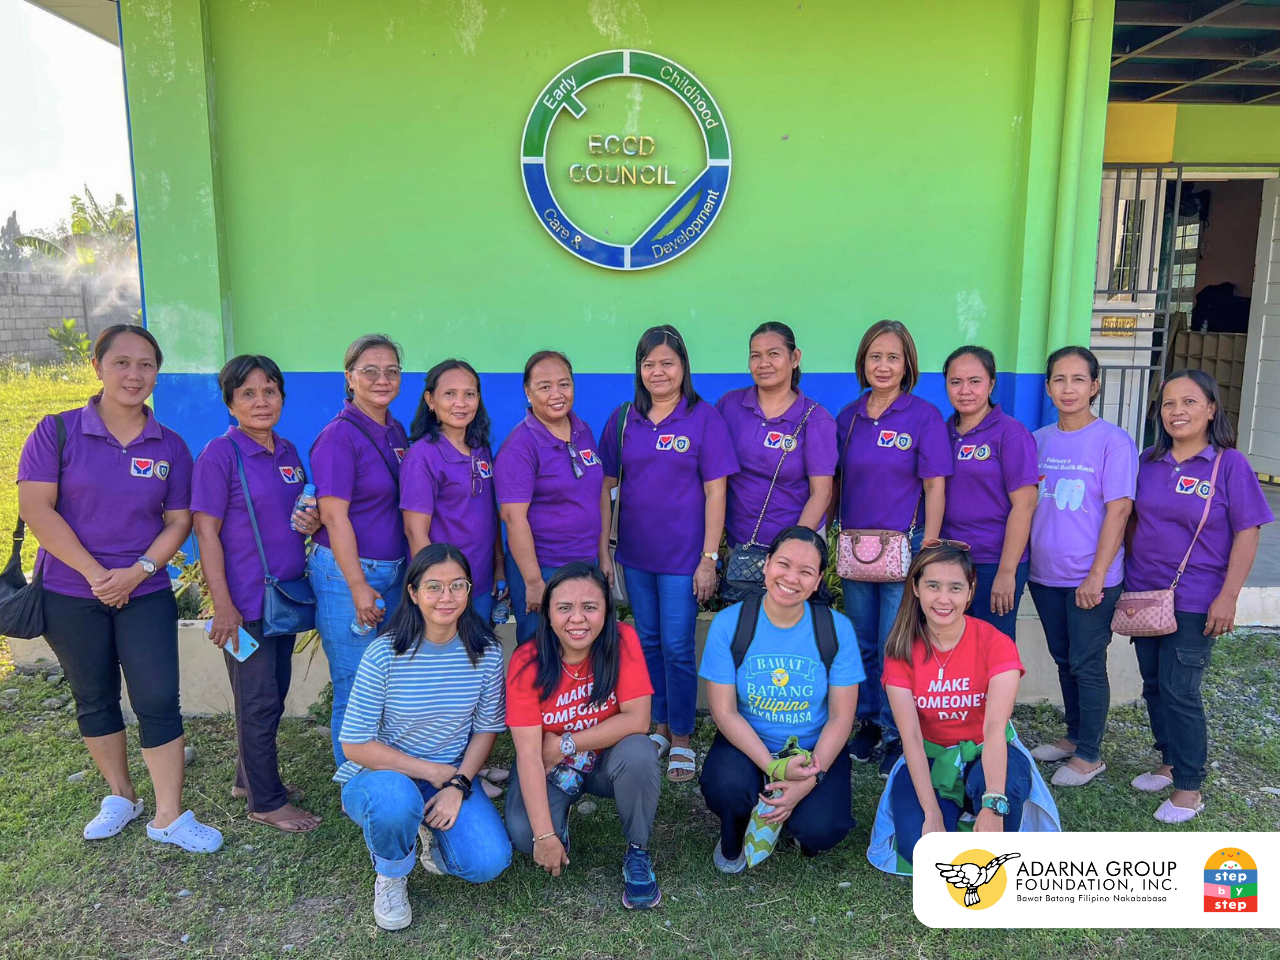 Day care workers of Ramos, Tarlac